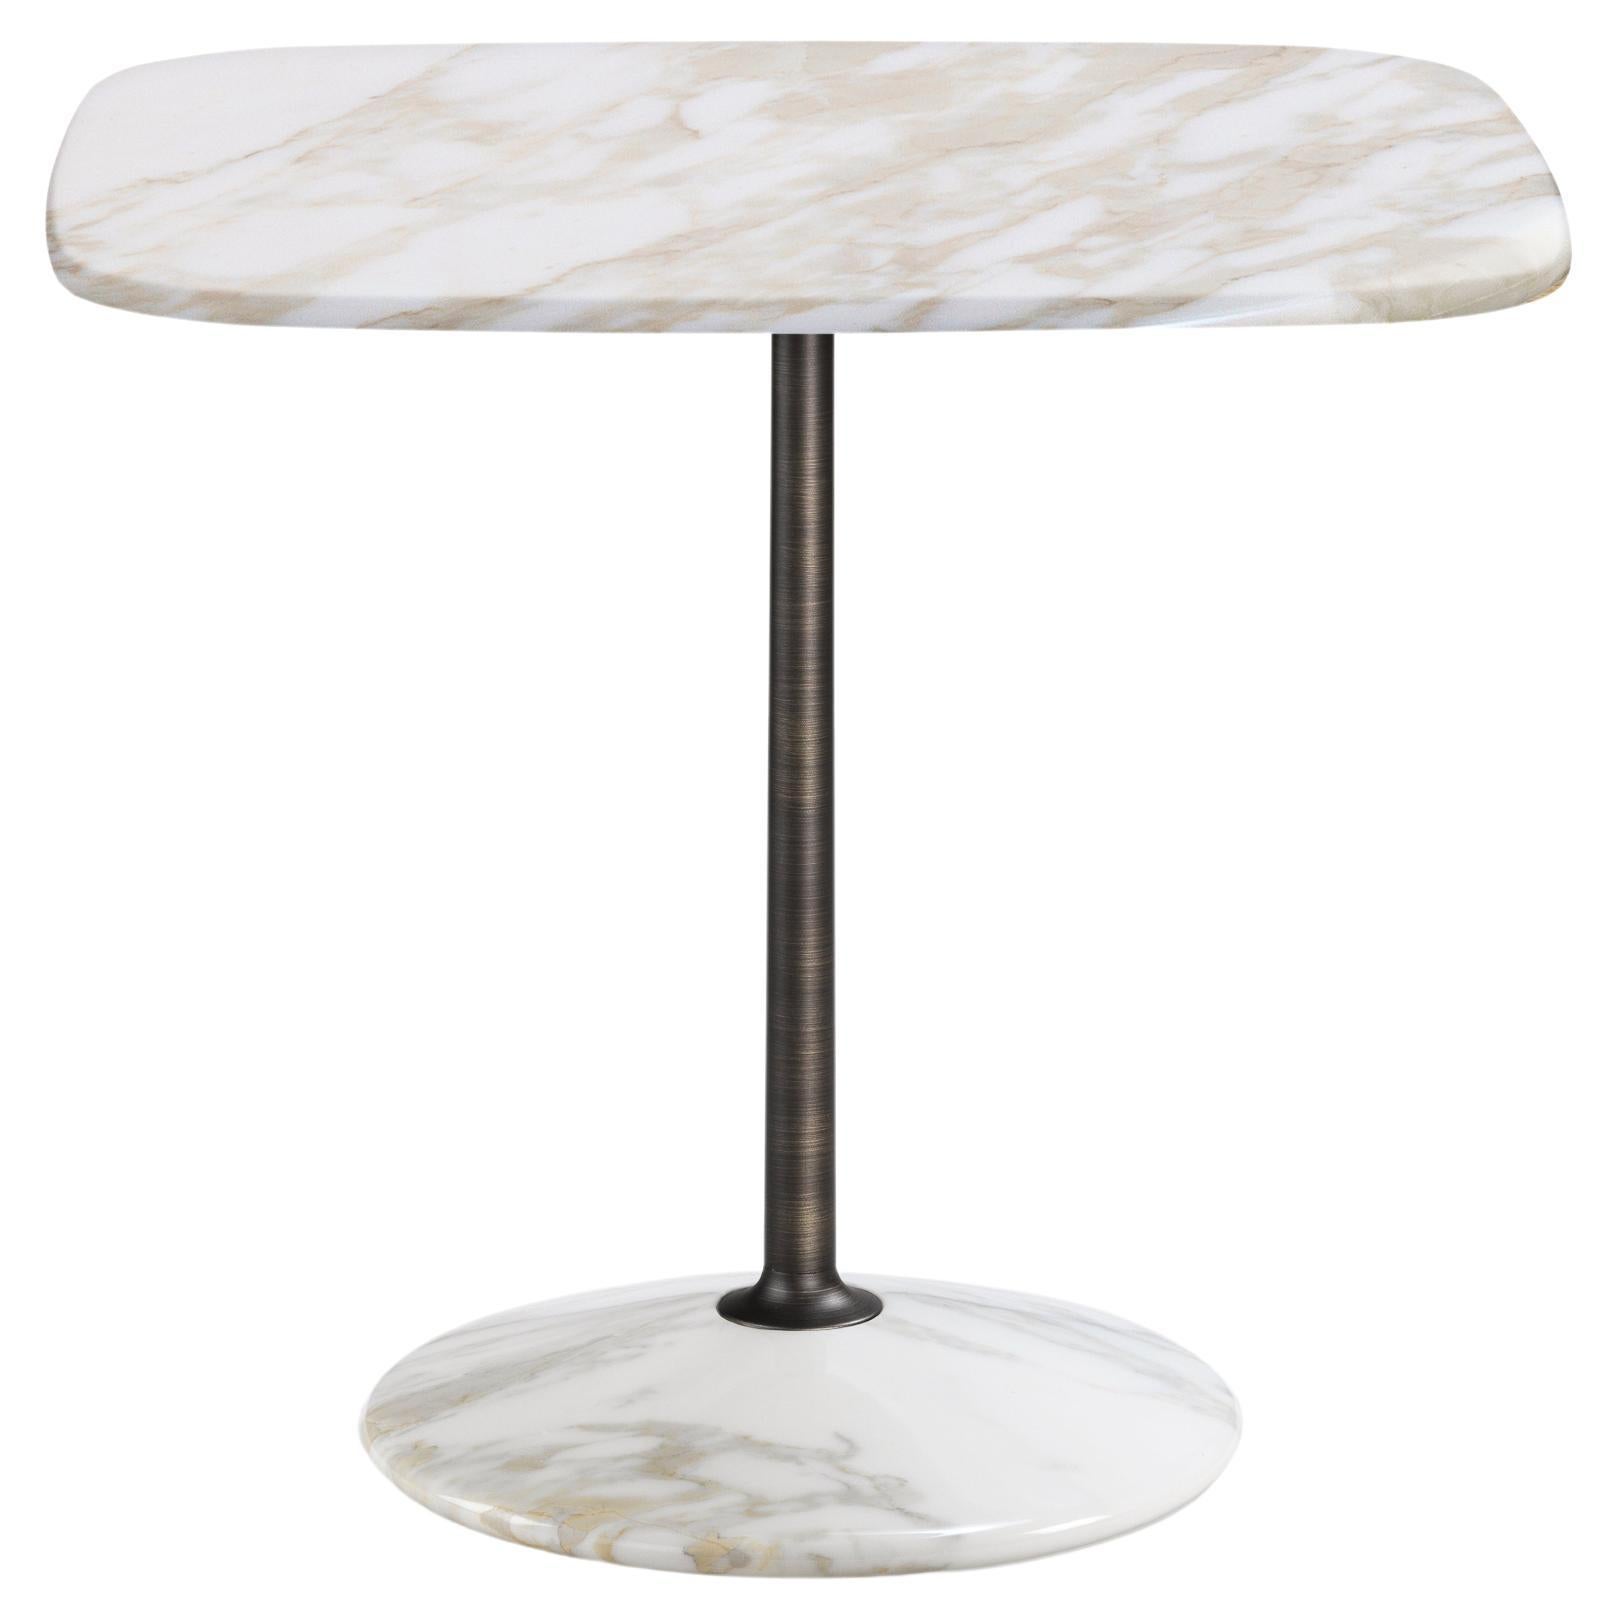 Arnold Short Table, Calacatta Gold Top, Burnished Brass Structure, Made in Italy